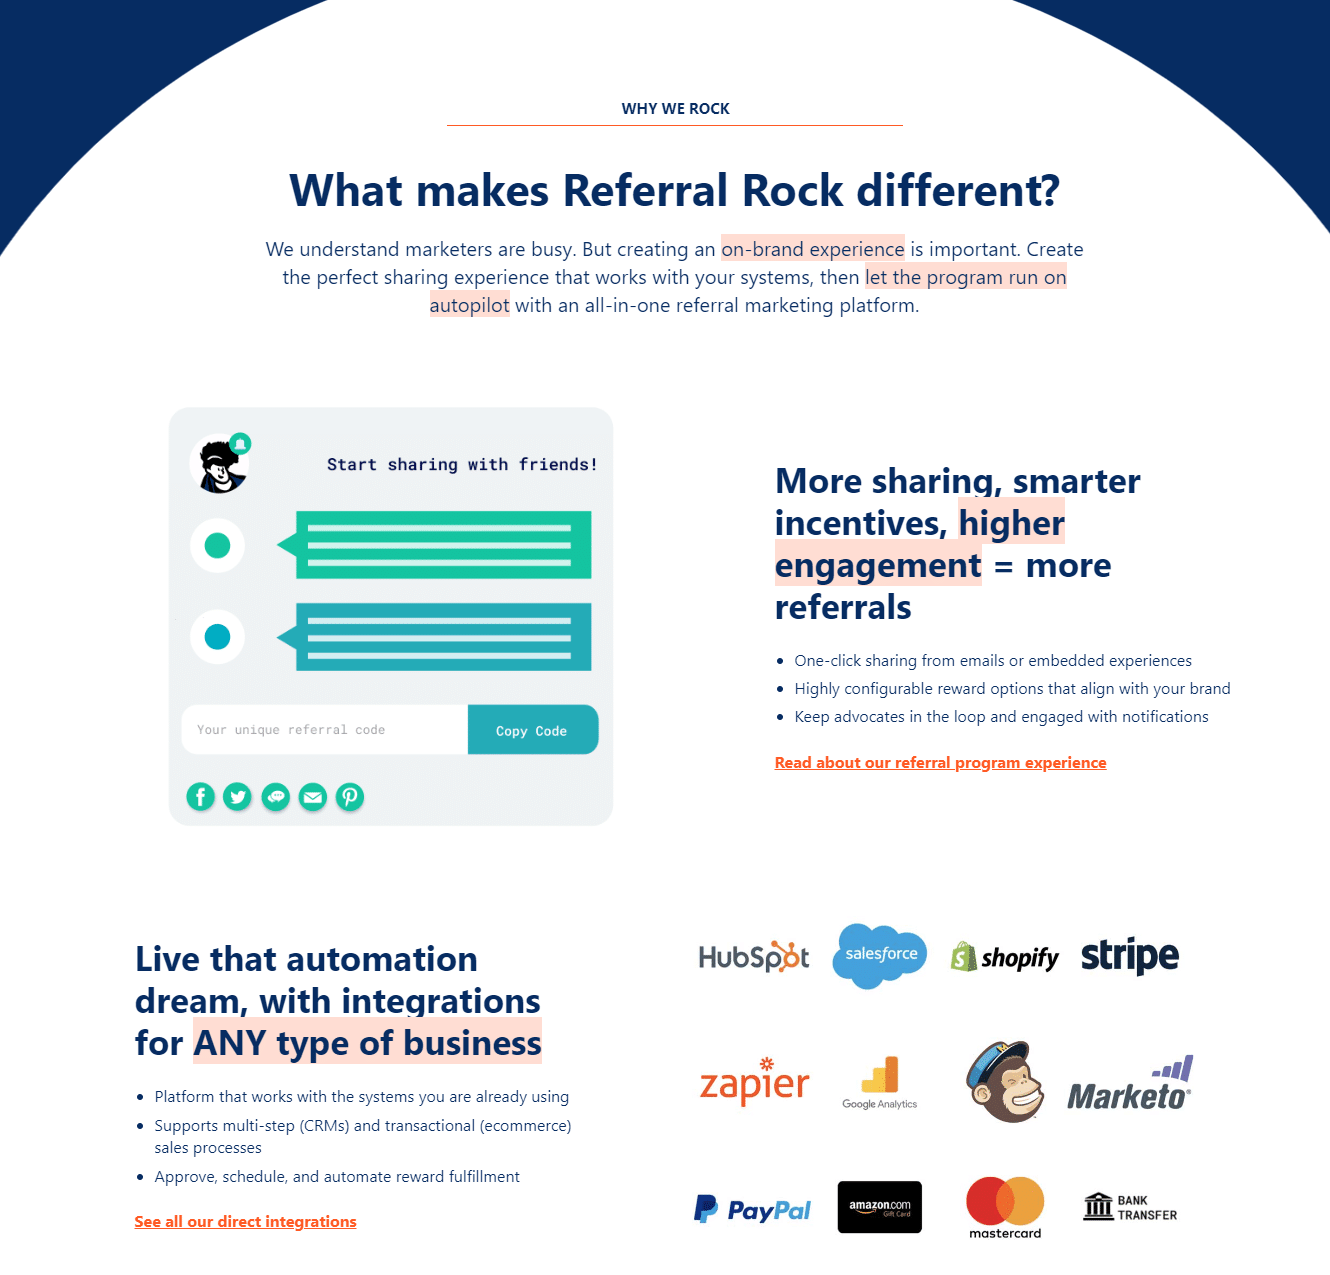 referral rock employee advocacy software makes different